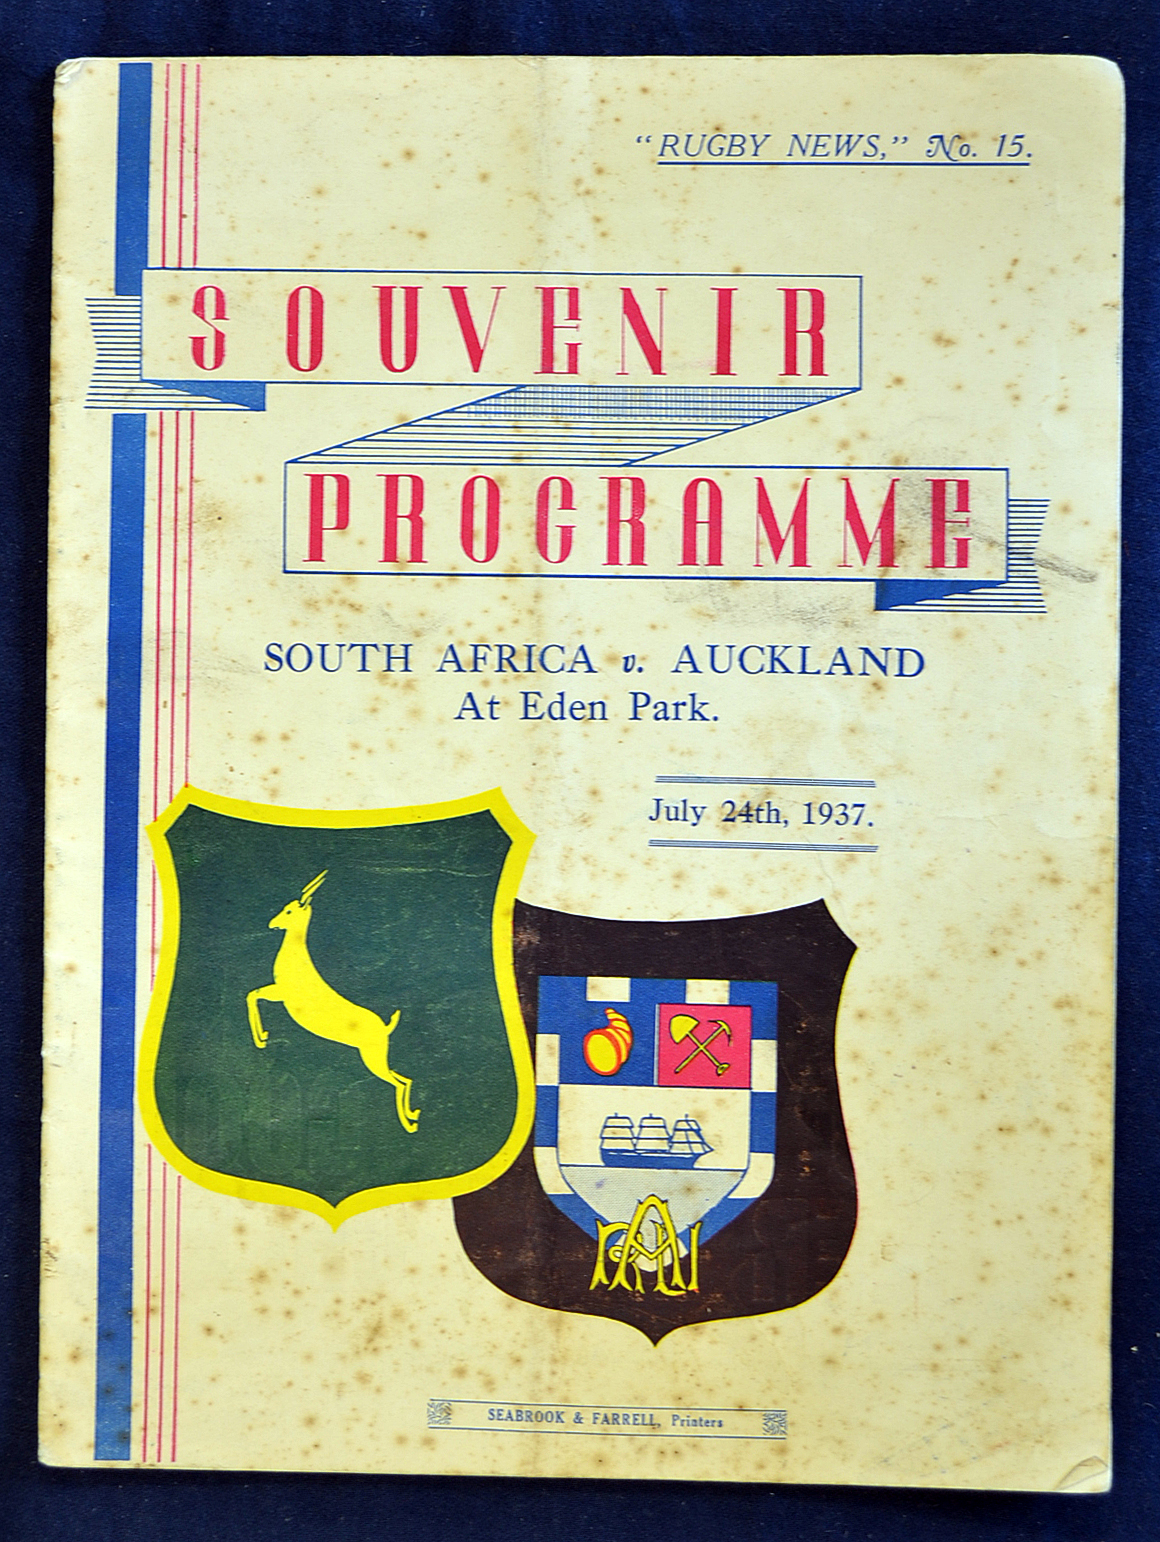 1937 South Africa v Auckland rugby programme - played at Eden Park on 24th July with the South - Image 2 of 2